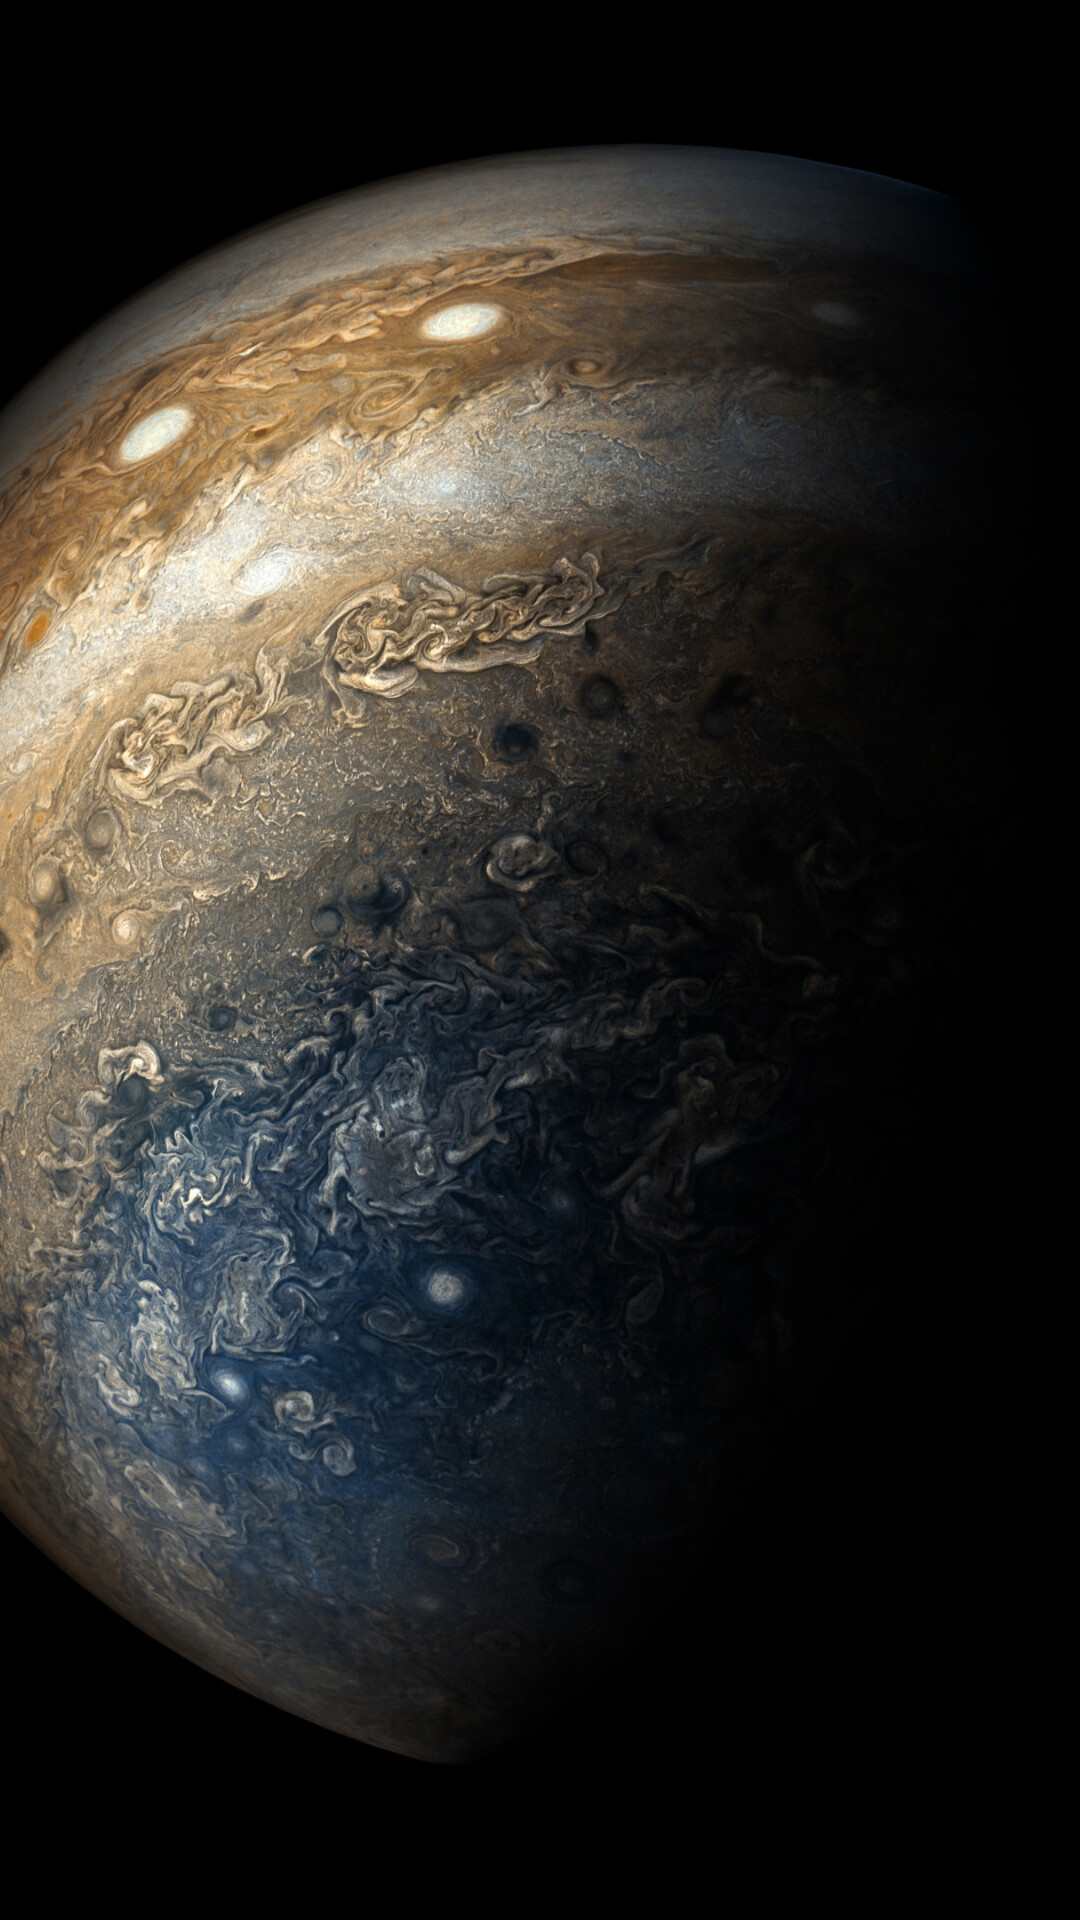 Solar System: Jupiter, The fifth planet from the Sun. 1080x1920 Full HD Wallpaper.